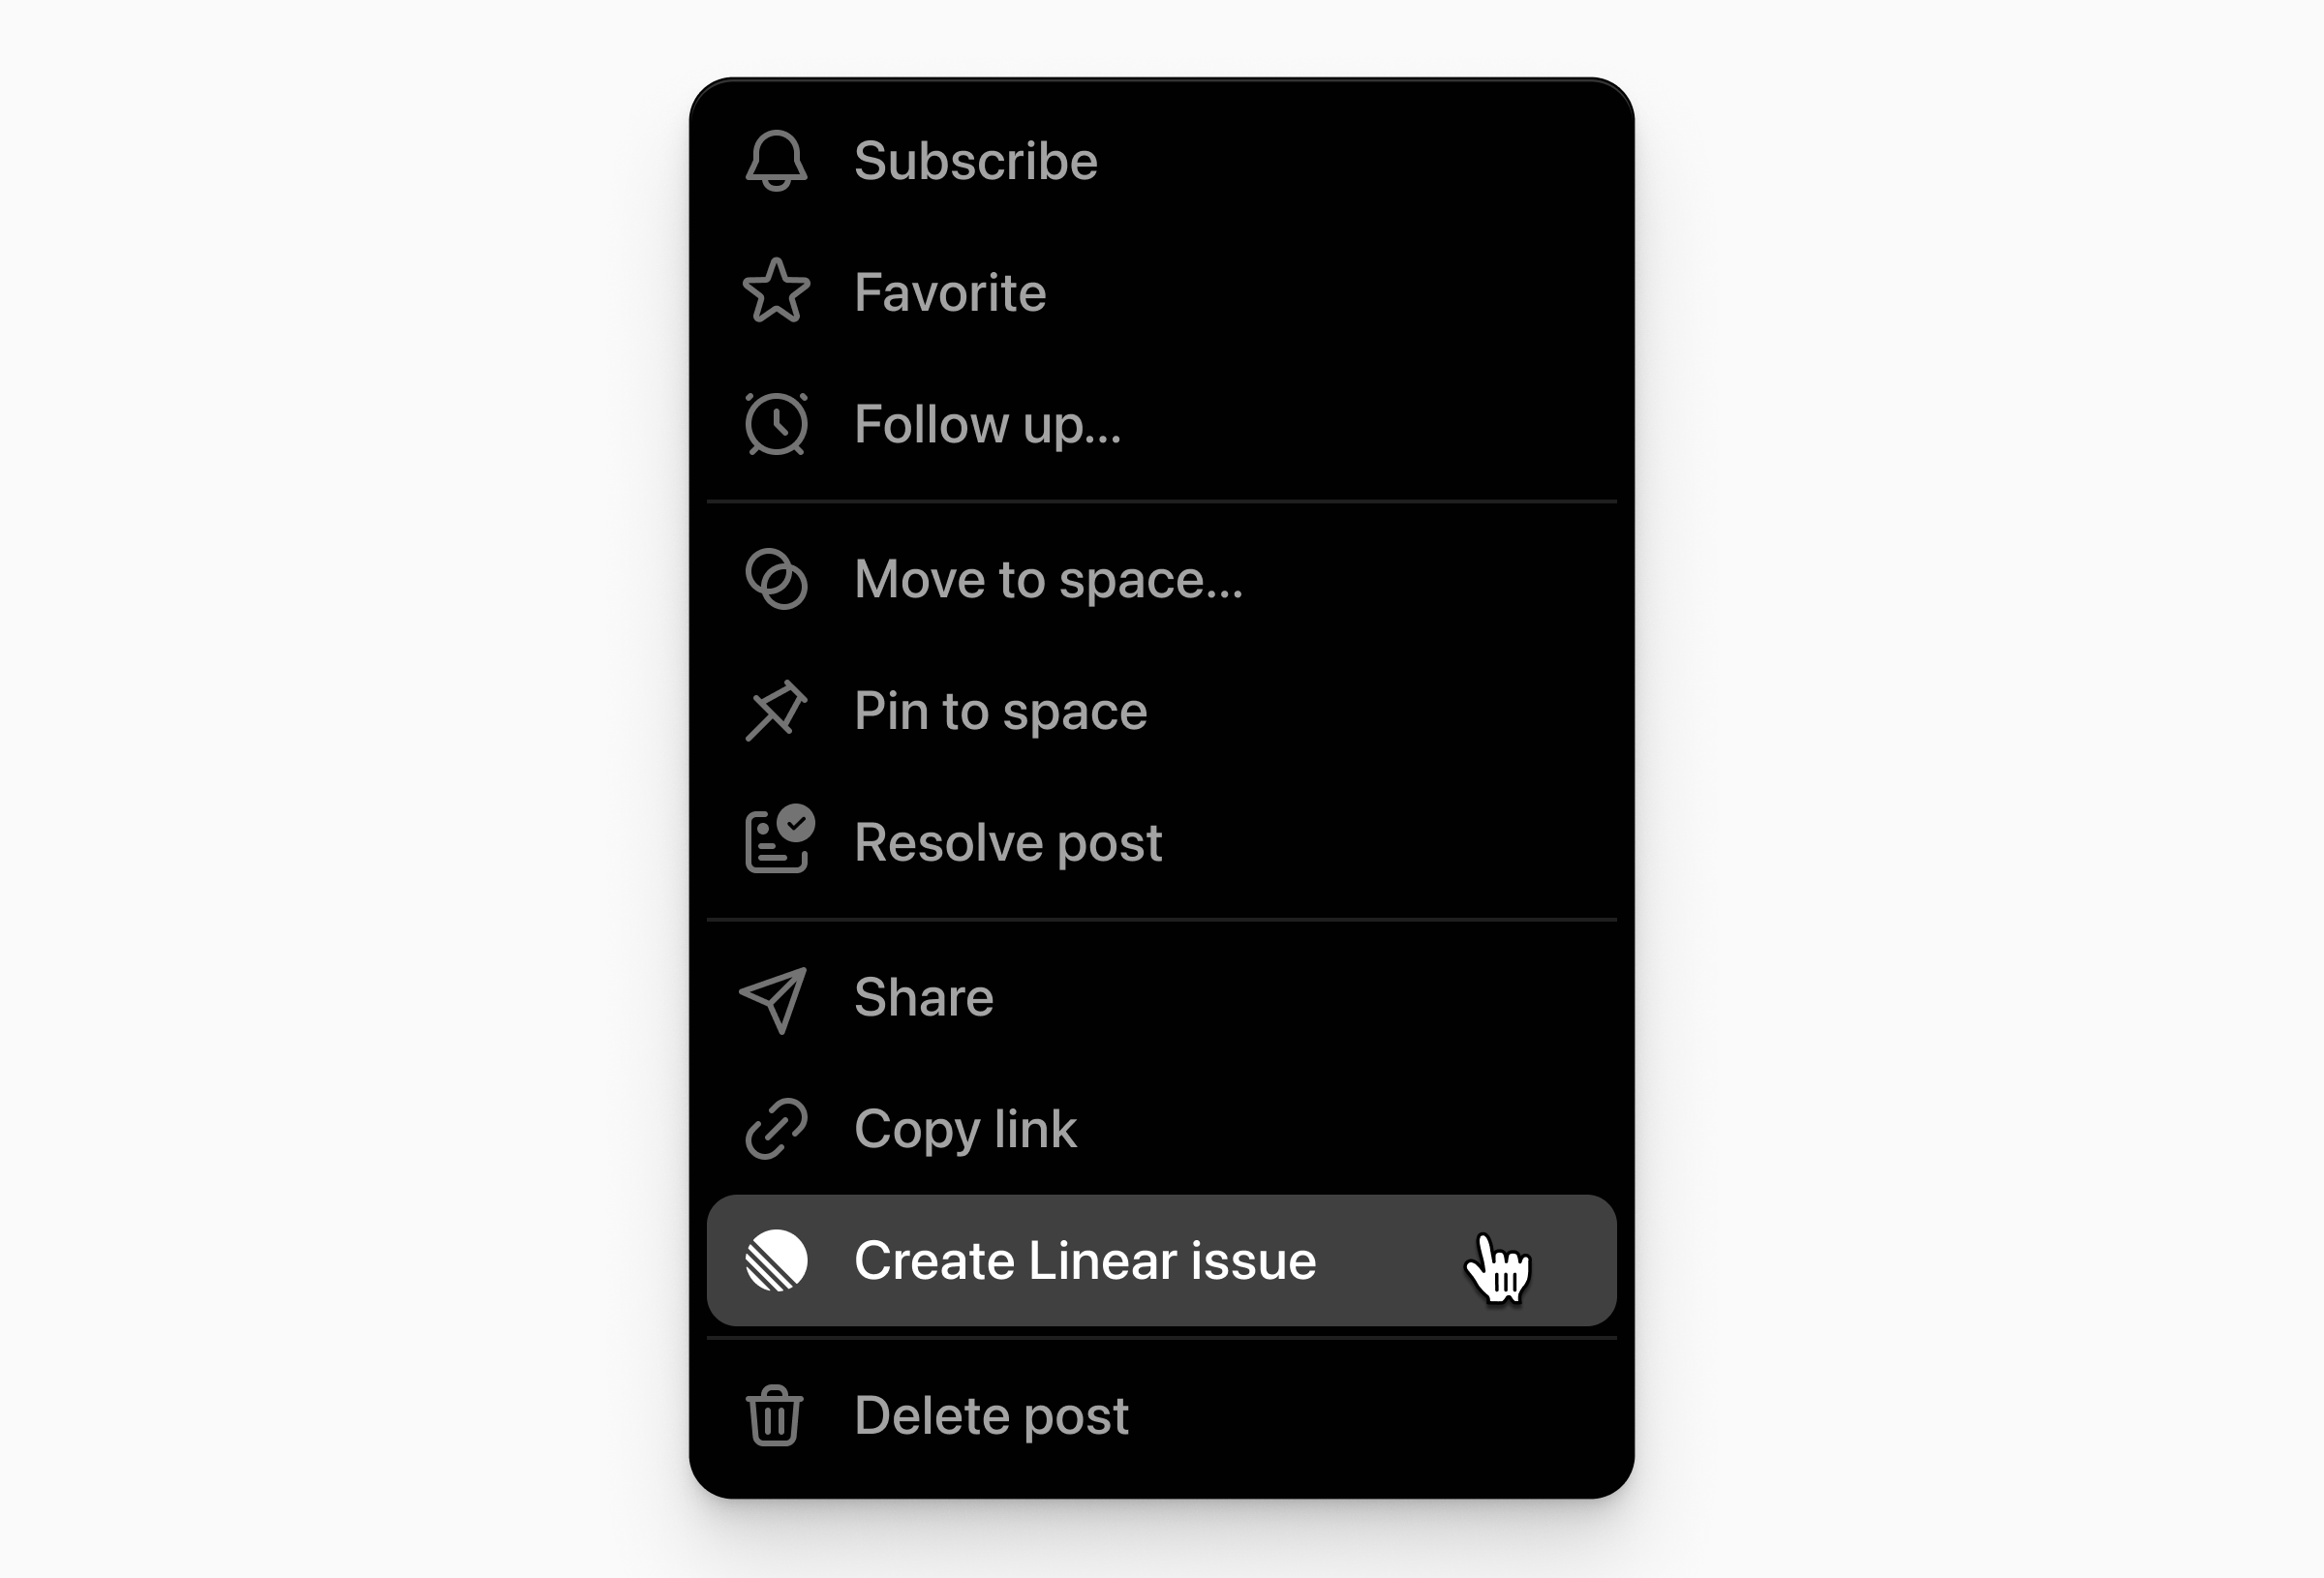 Create a Linear issue from the post menu